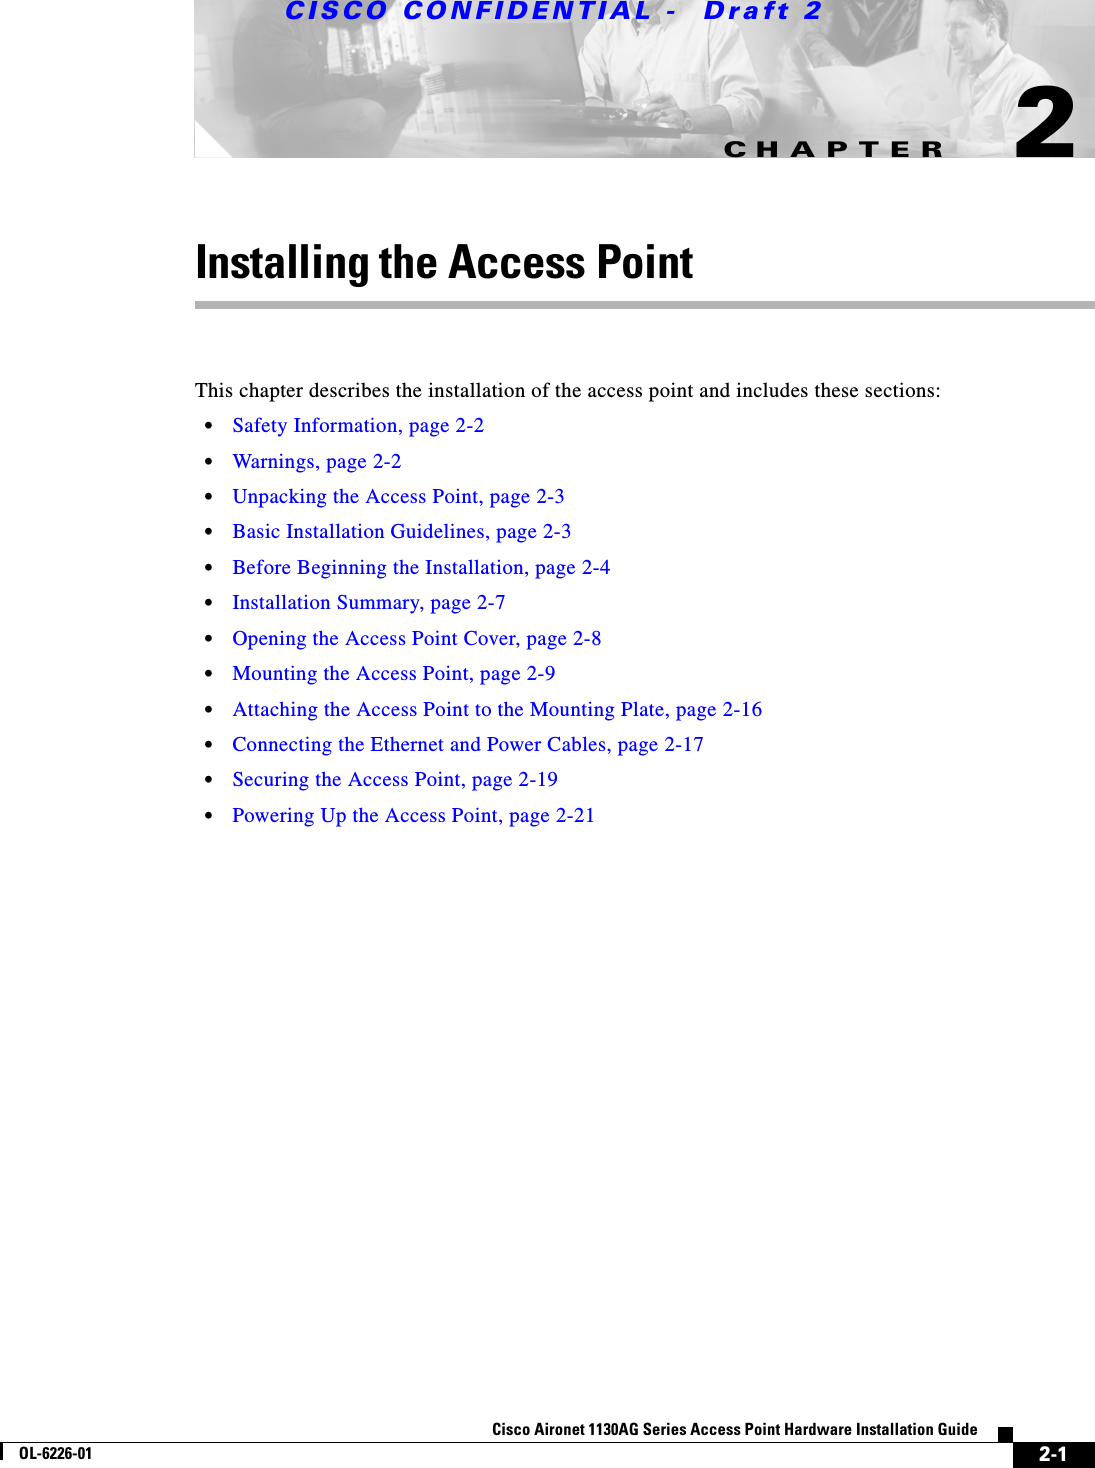 CHAPTER CISCO CONFIDENTIAL -  Draft 22-1Cisco Aironet 1130AG Series Access Point Hardware Installation GuideOL-6226-012Installing the Access PointThis chapter describes the installation of the access point and includes these sections:•Safety Information, page 2-2•Warnings, page 2-2•Unpacking the Access Point, page 2-3•Basic Installation Guidelines, page 2-3•Before Beginning the Installation, page 2-4•Installation Summary, page 2-7•Opening the Access Point Cover, page 2-8•Mounting the Access Point, page 2-9•Attaching the Access Point to the Mounting Plate, page 2-16•Connecting the Ethernet and Power Cables, page 2-17•Securing the Access Point, page 2-19•Powering Up the Access Point, page 2-21